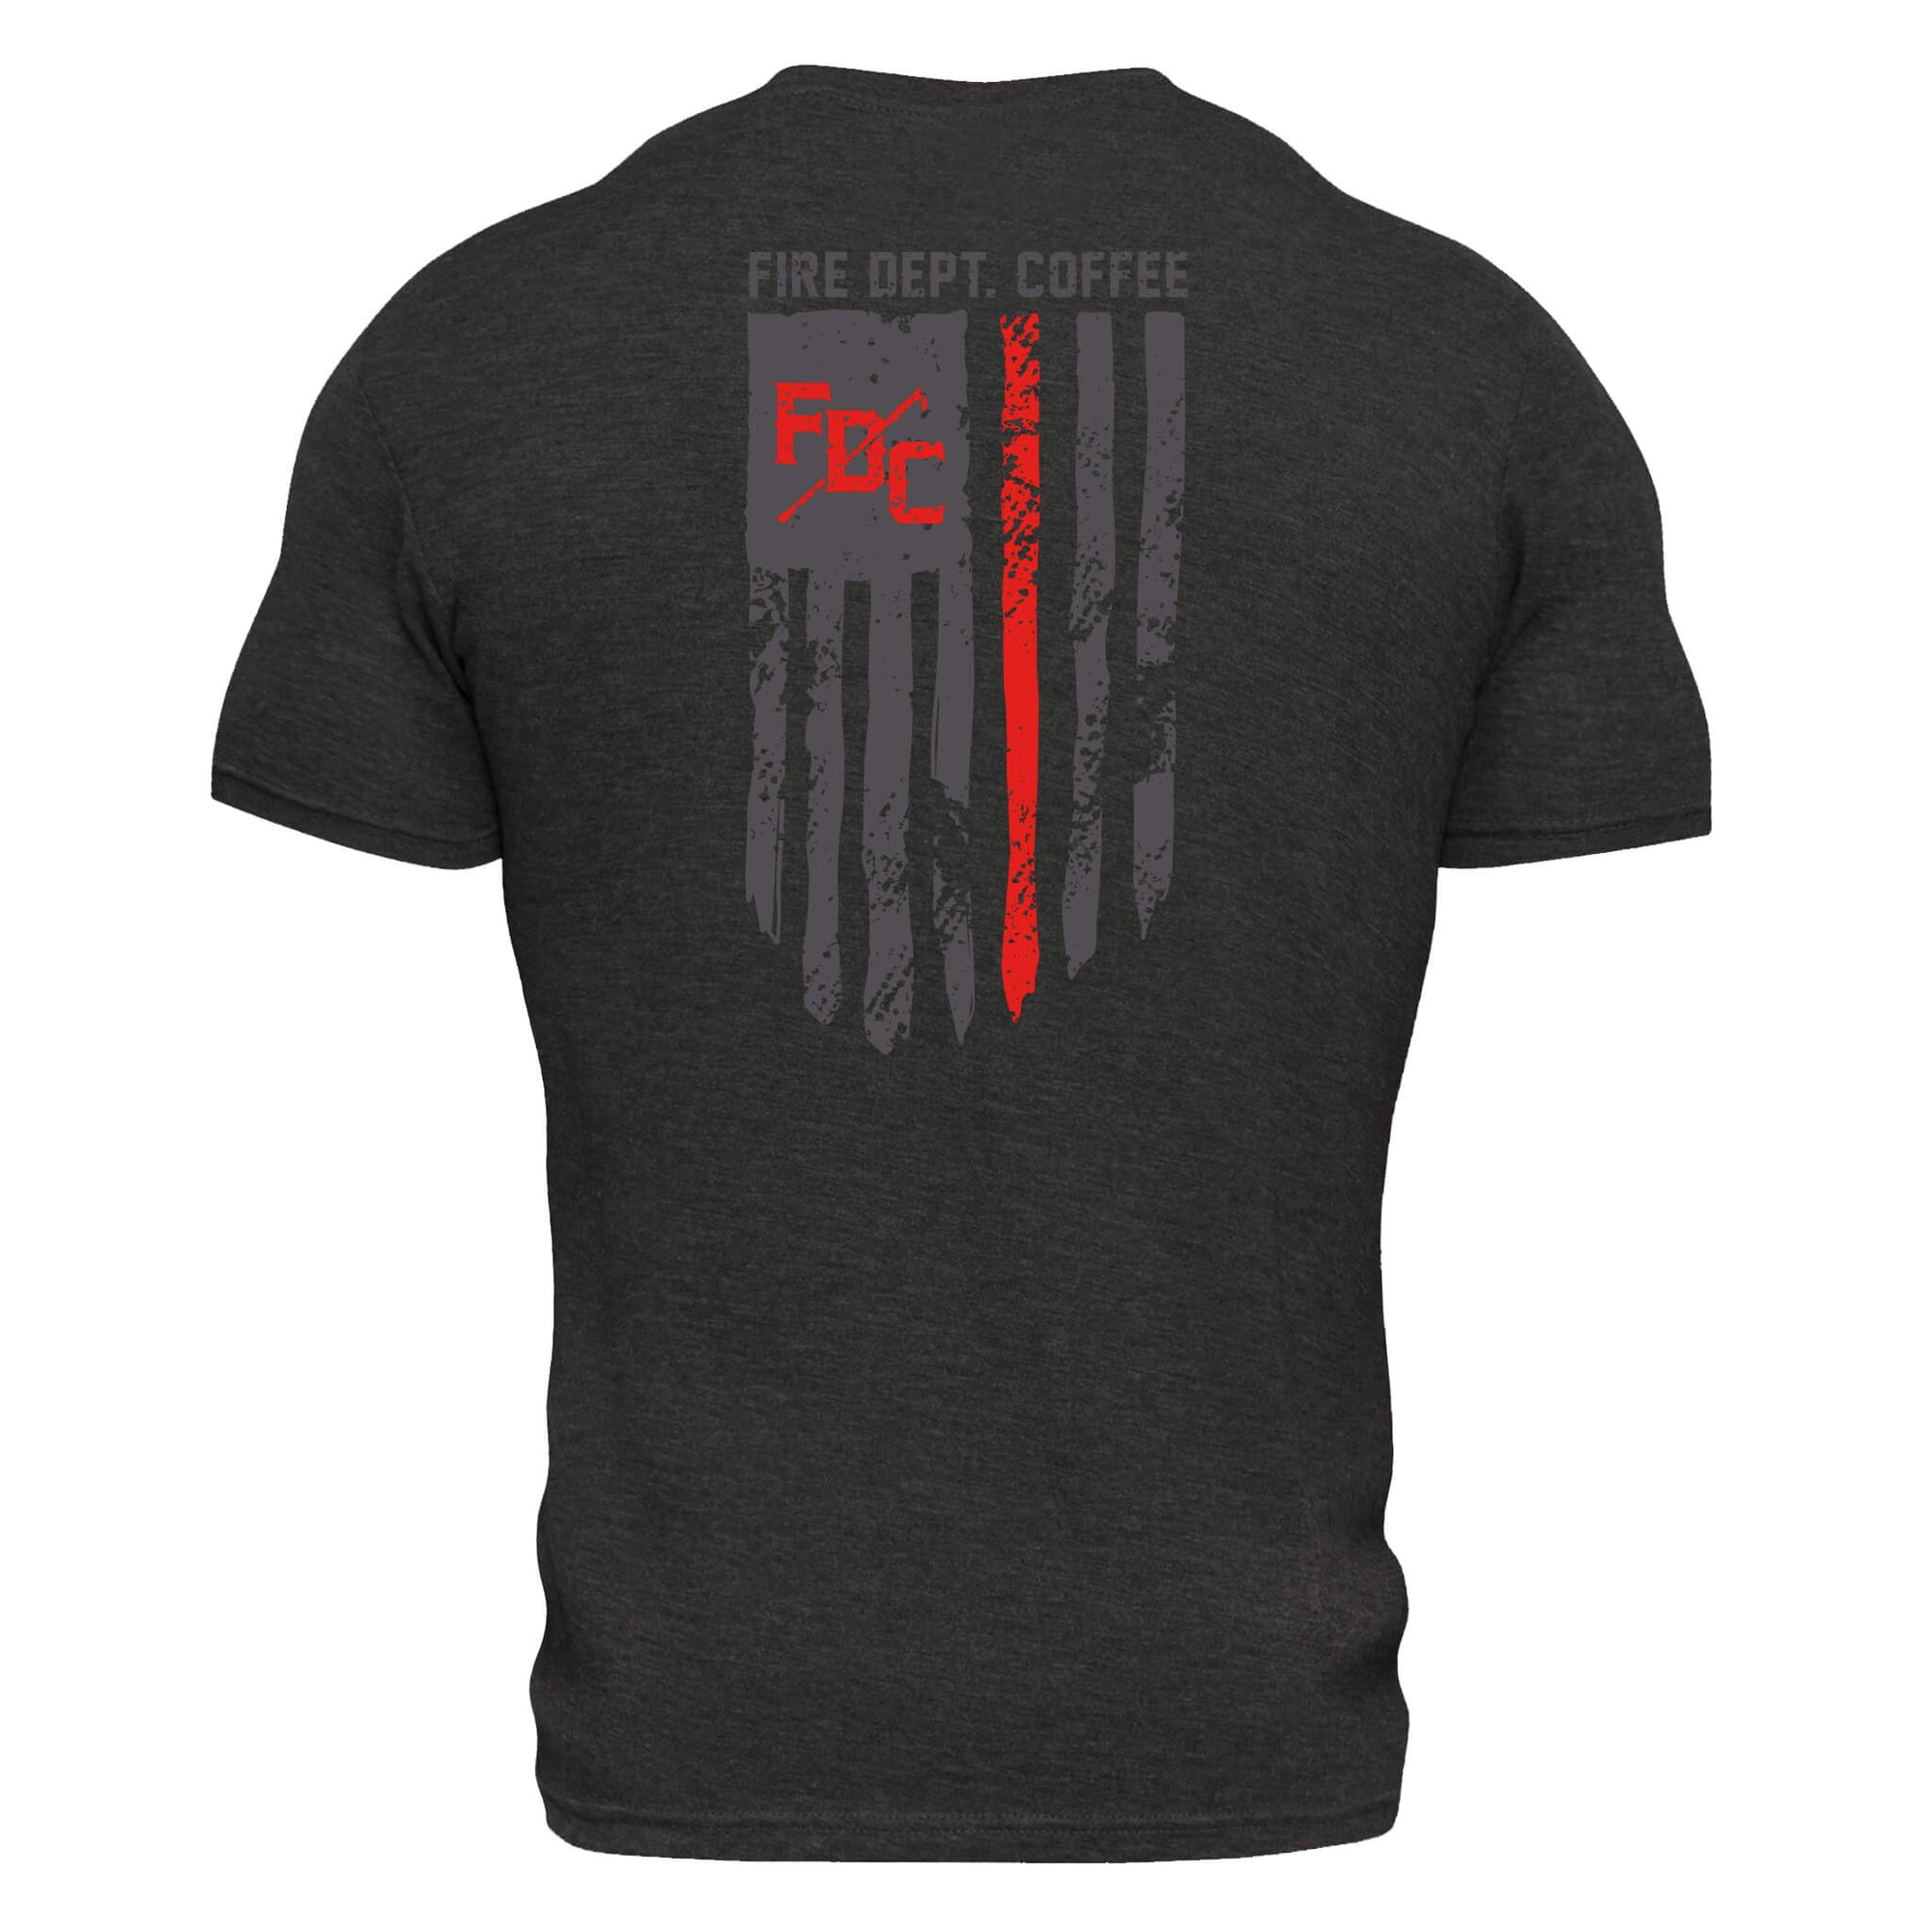 The back of a black t shirt with the thin red line going down the back. FDC pike pole logo is in the top right corner of the flag in red and text "fire dept. coffee" is above the flag.